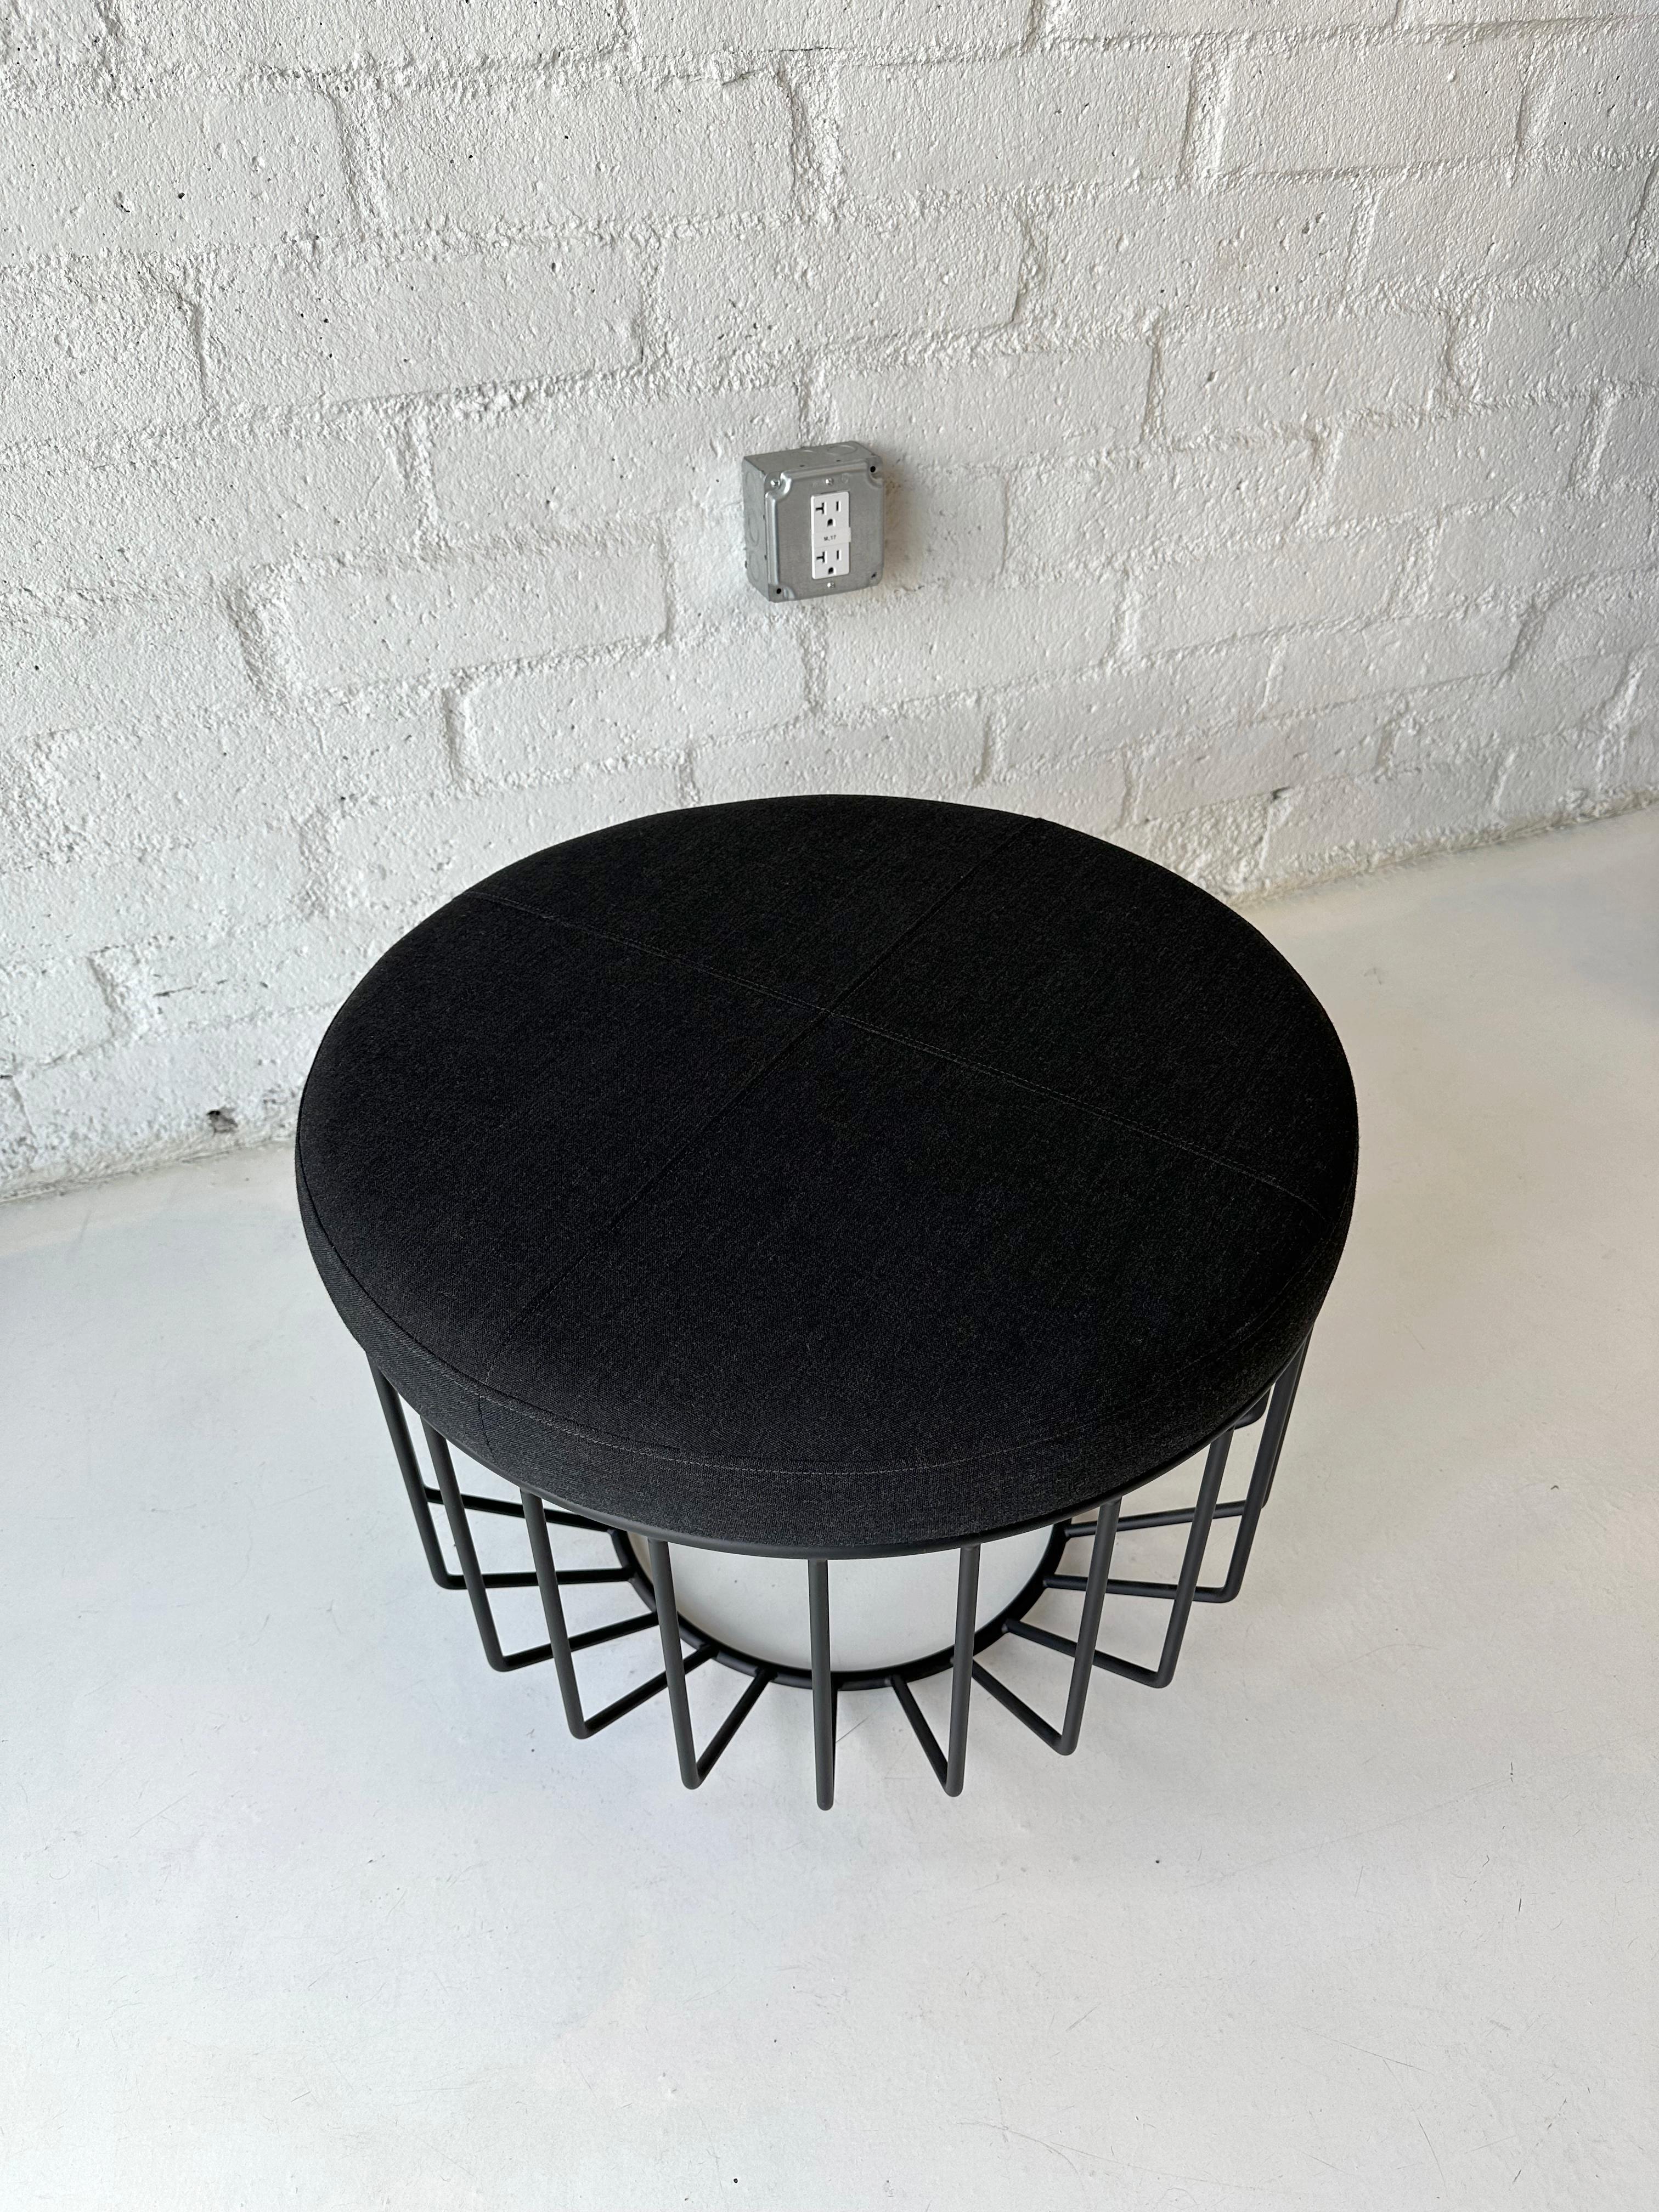 American Wired Ottoman, by Phase Design, Flat Black & Kvadrat Remix Fabric For Sale